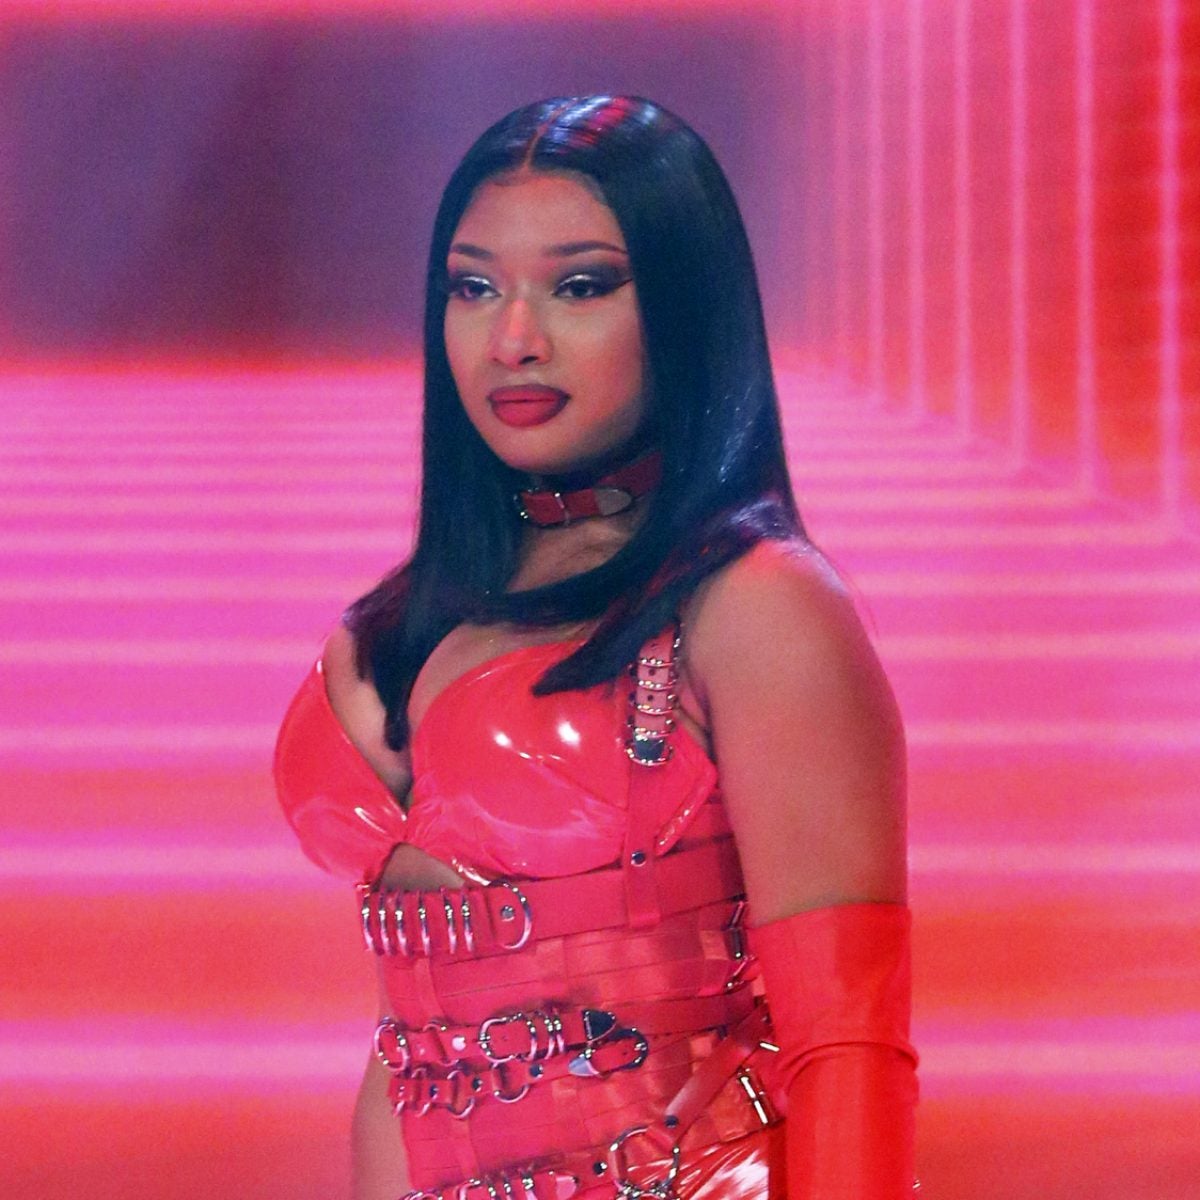 'I Am No One's Property': Megan Thee Stallion Gets Greenlight From Judge To Release New Music